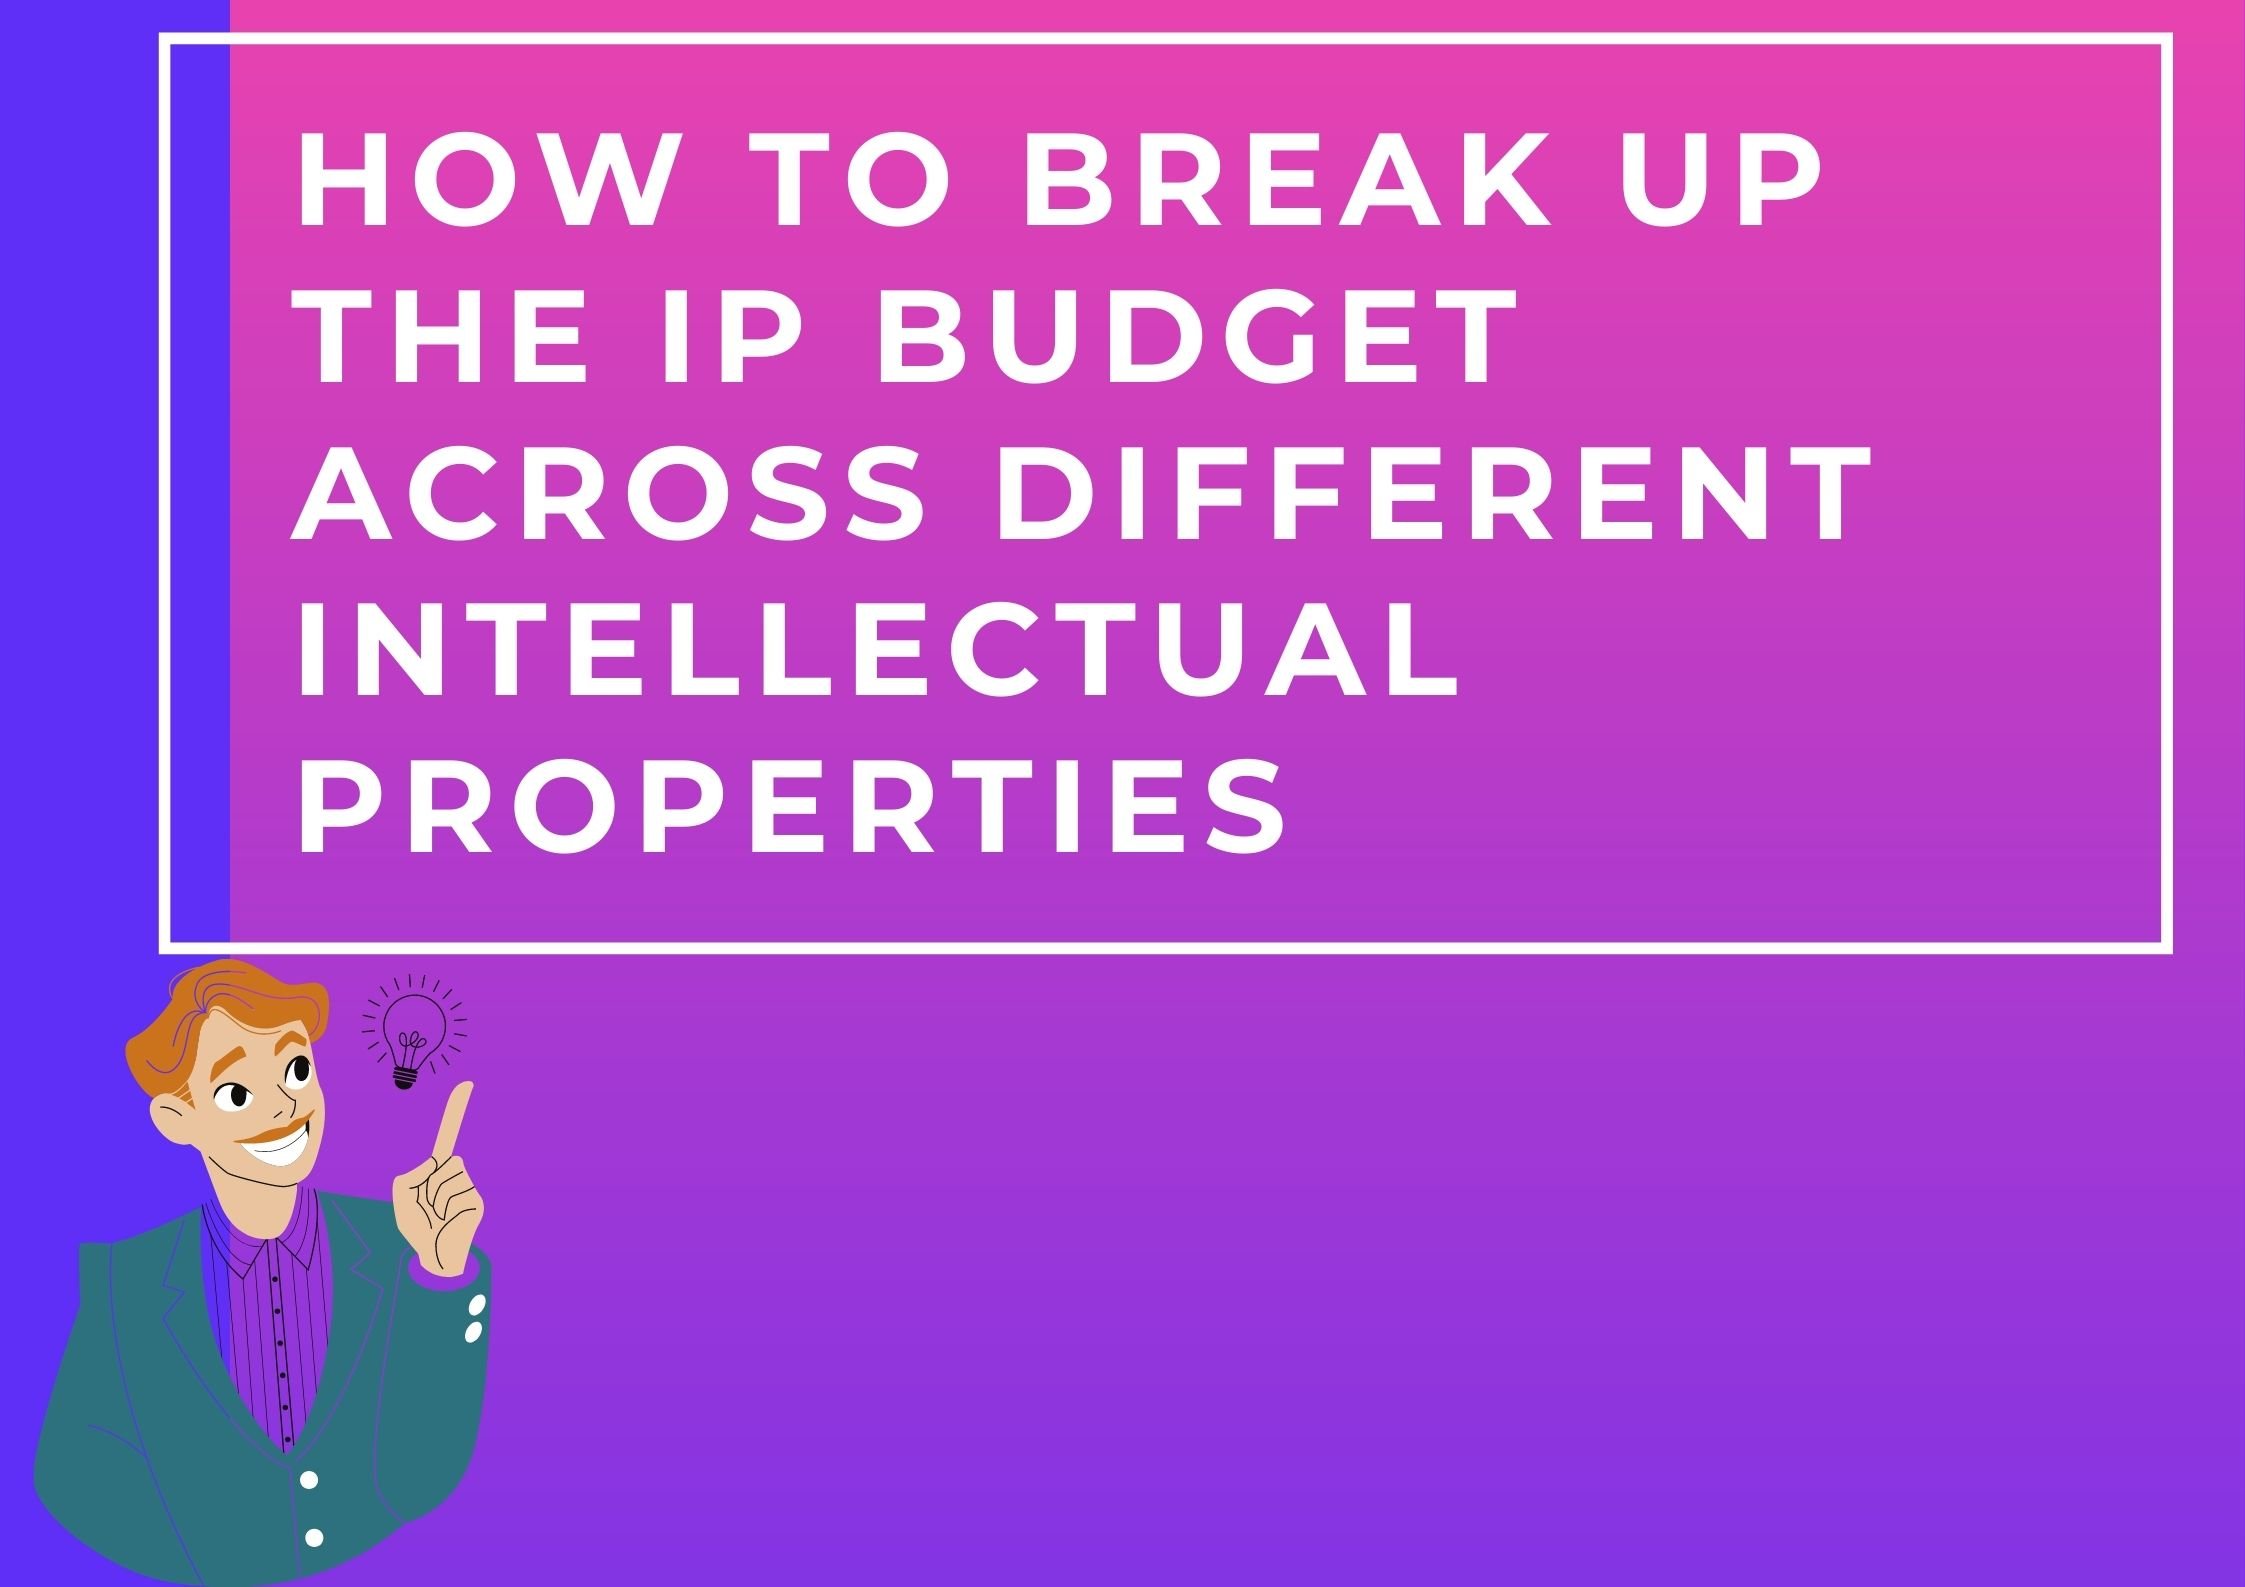 HOW TO BREAK UP THE IP BUDGET ACROSS DIFFERENT INTELLECTUAL PROPERTIES